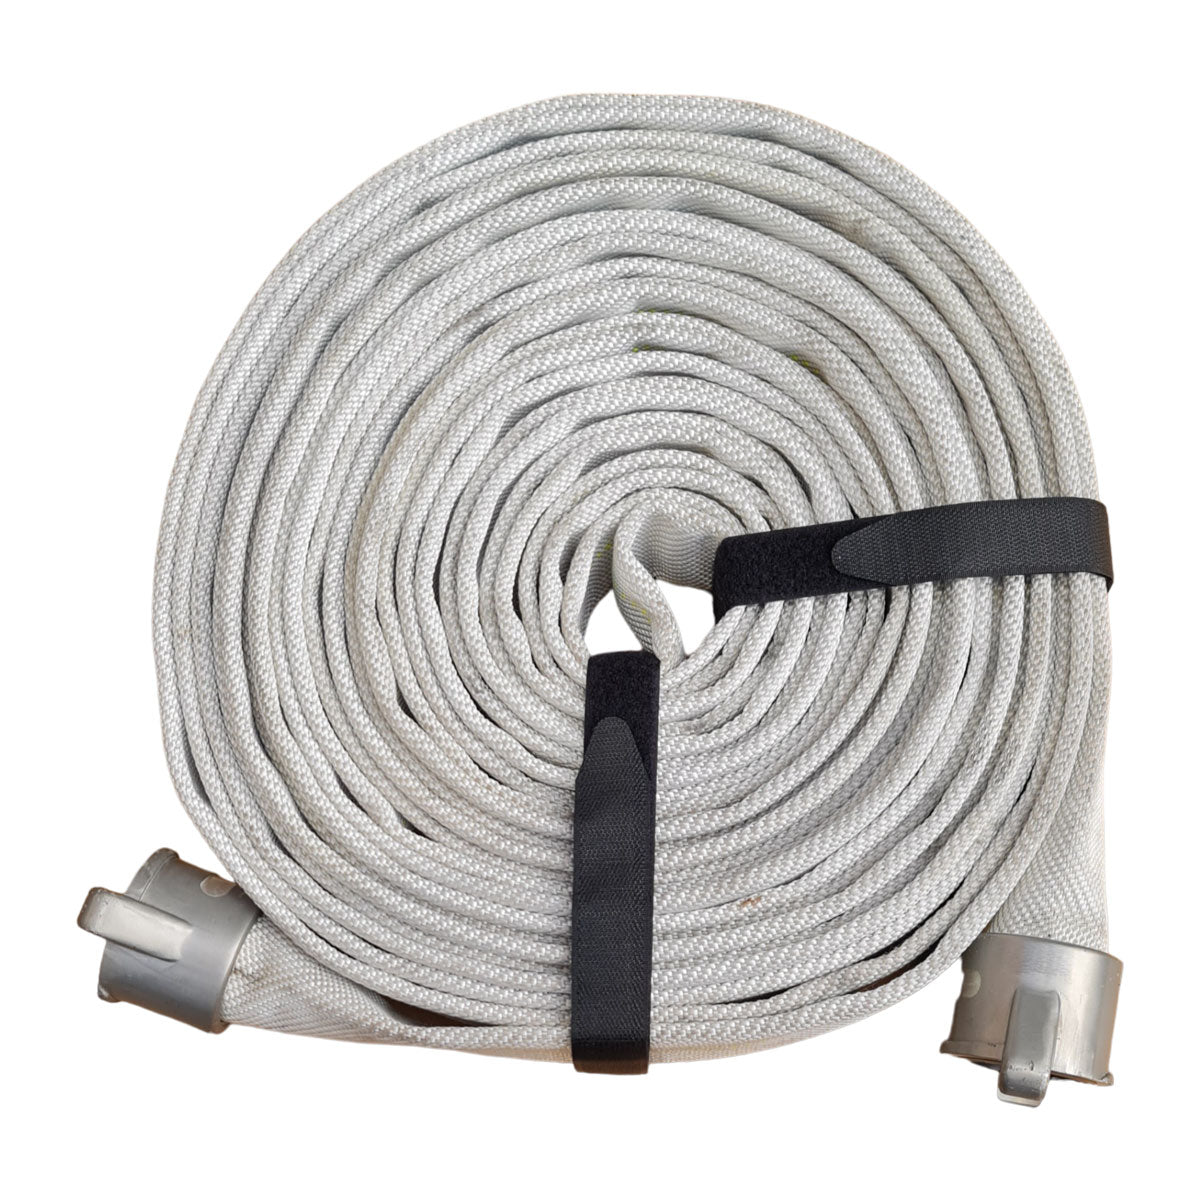 Industrial Fire Hose 38mm x 30 meters Quick Connect Coupled